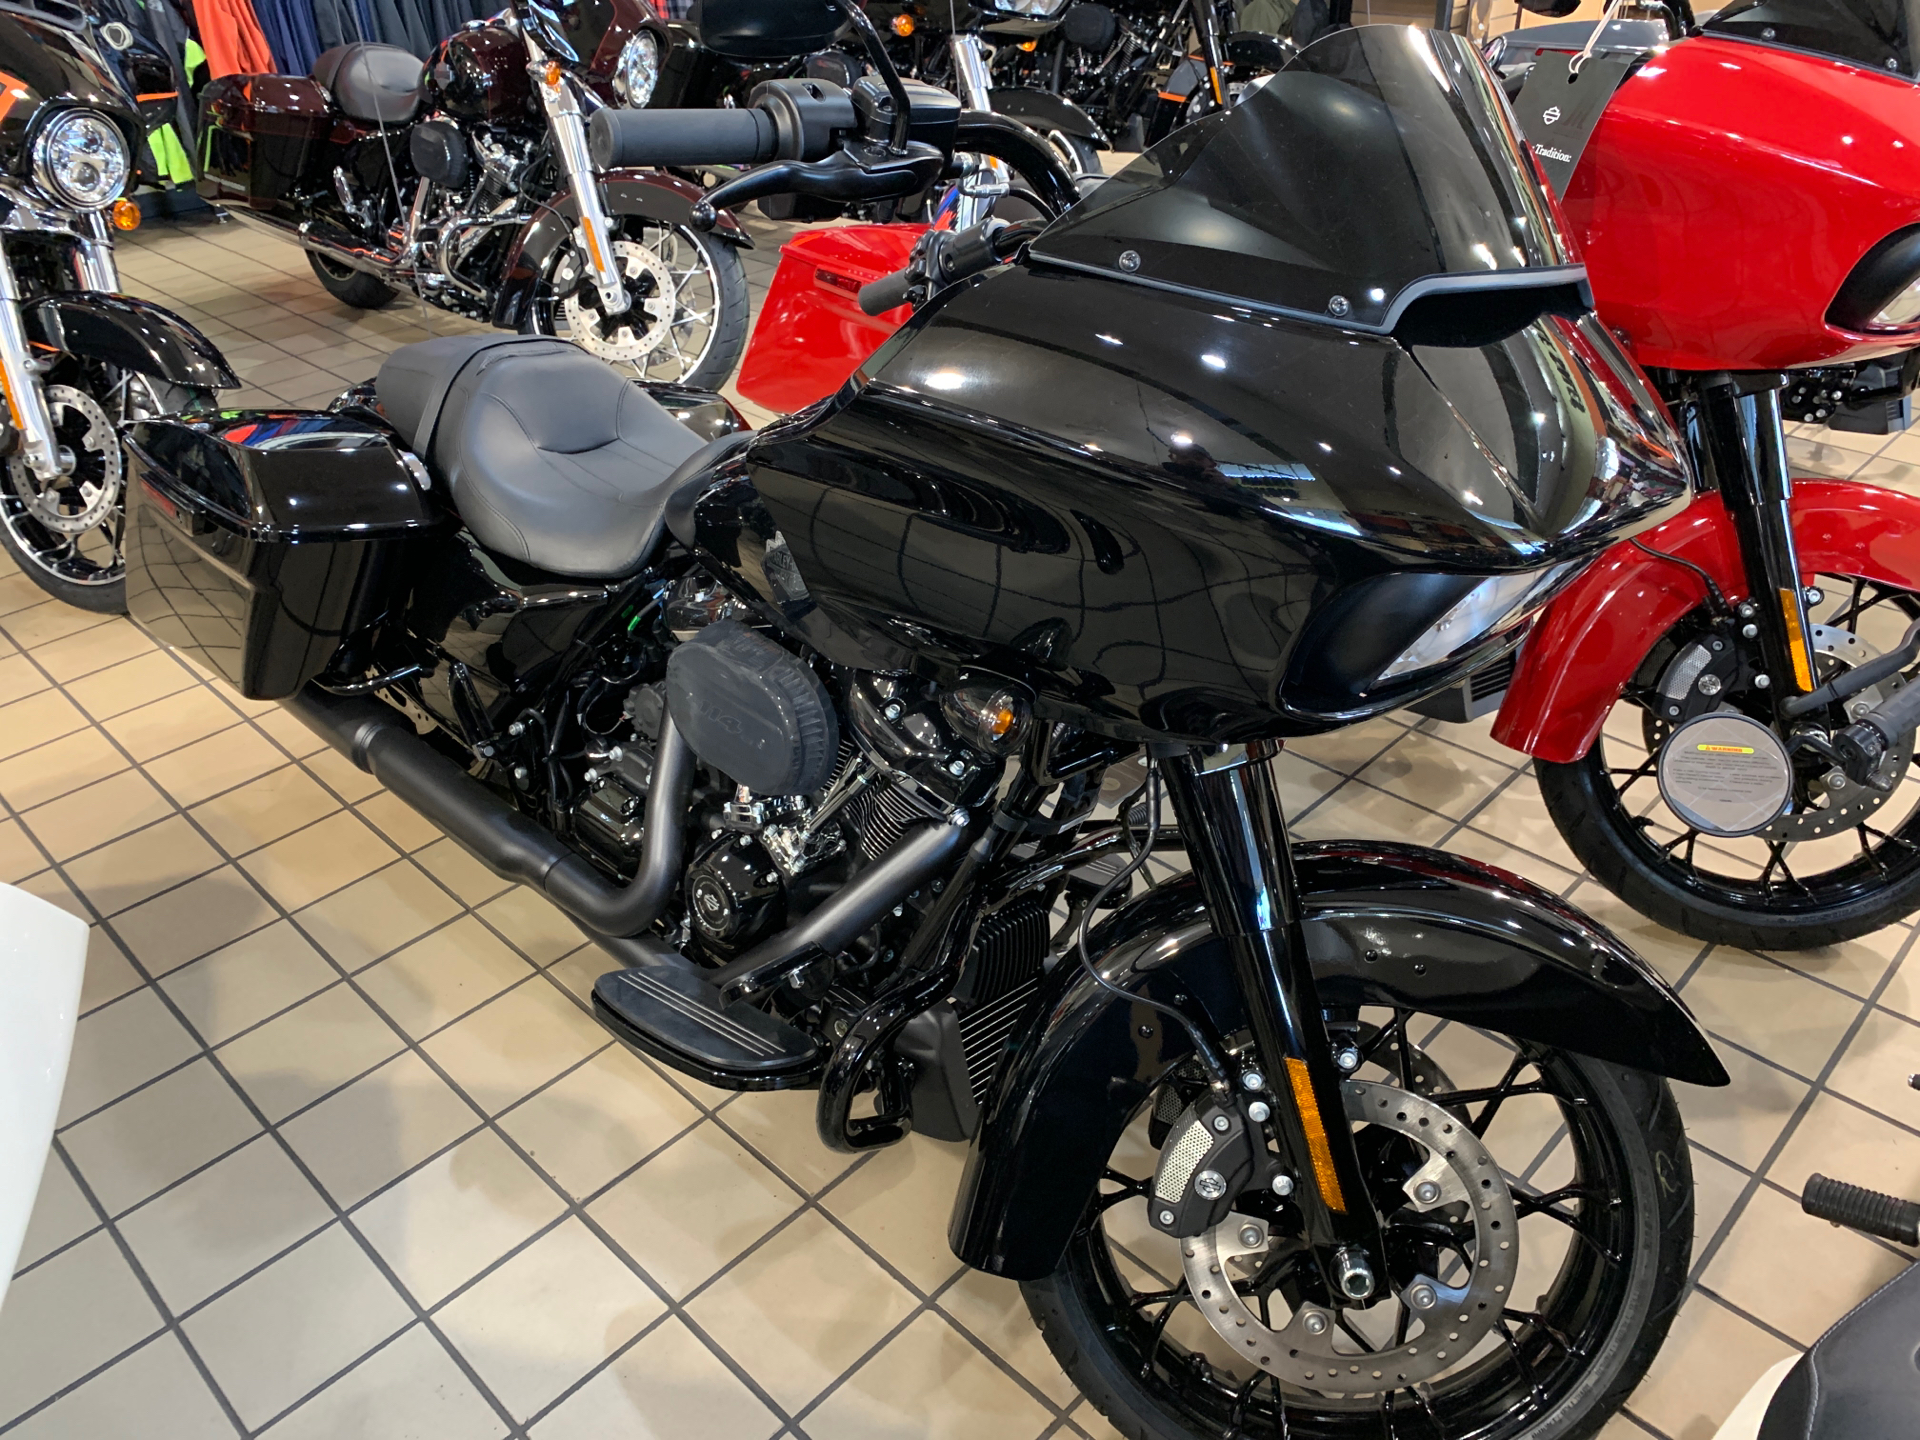 2022 Harley-Davidson Road Glide® Special in Dumfries, Virginia - Photo 1